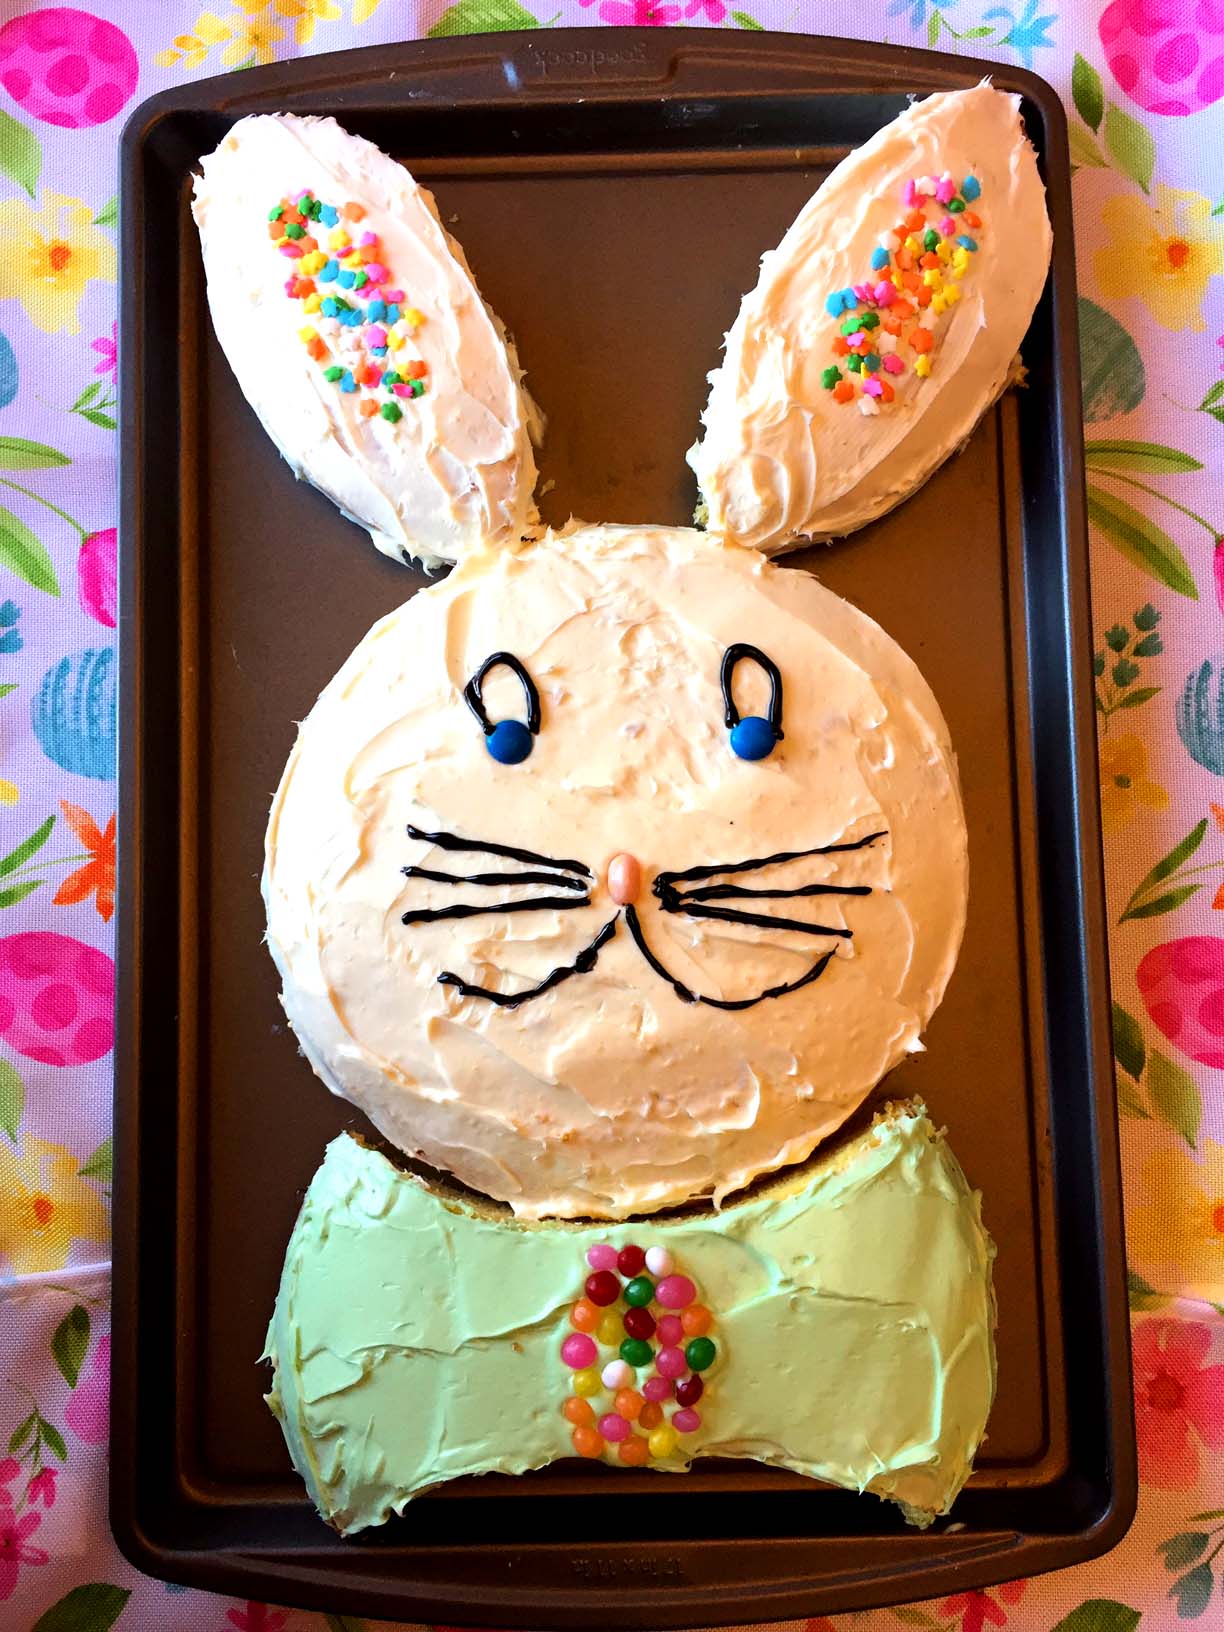 25 Best Easter Cake Ideas - How to Decorate a Beautiful Easter Cake